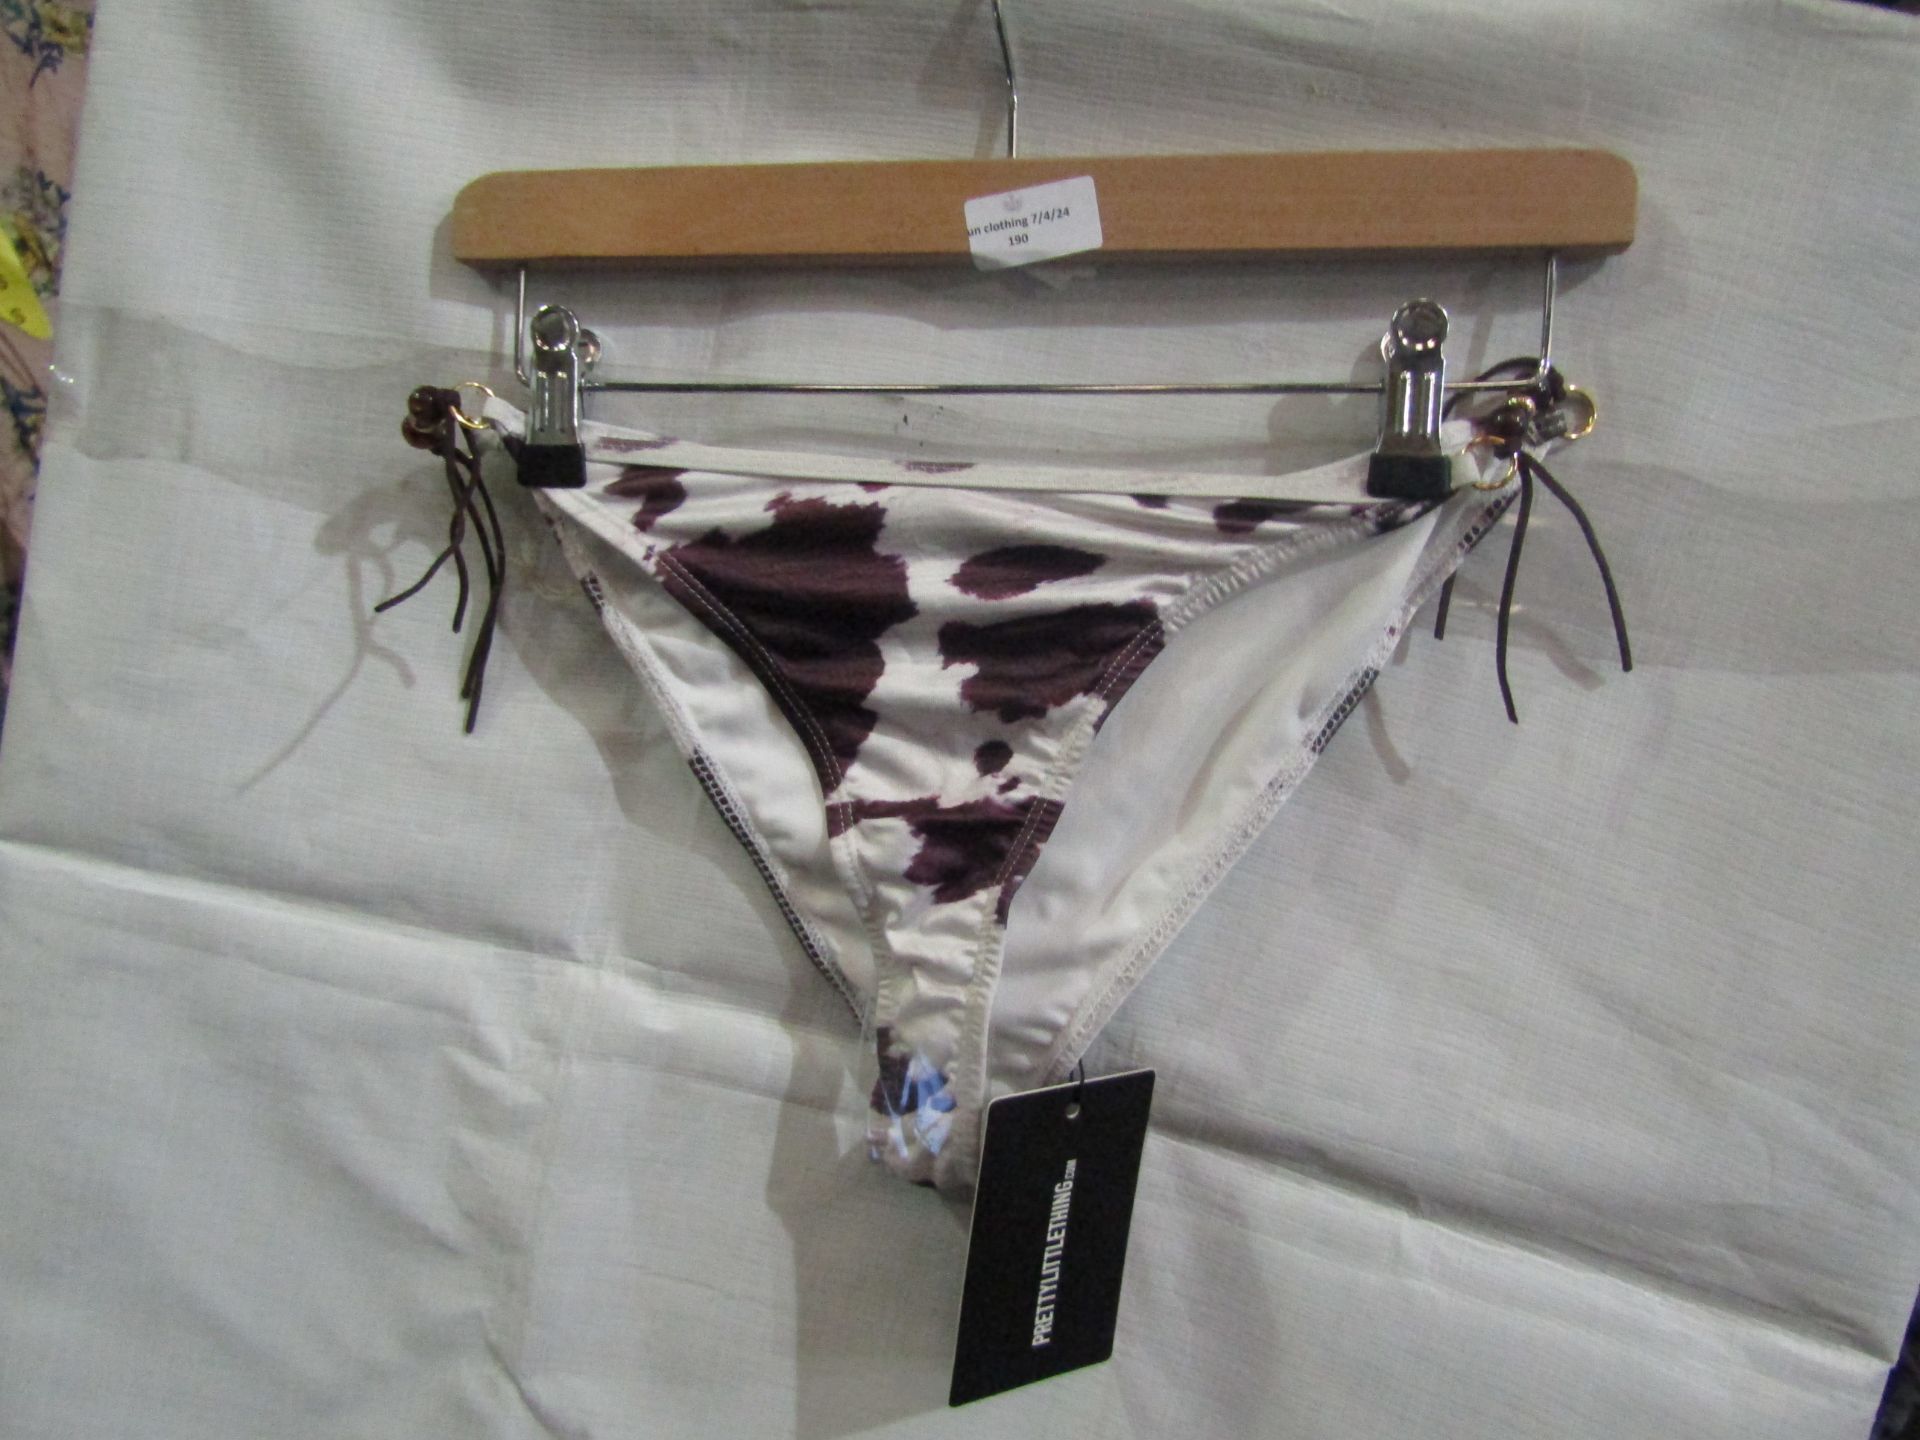 5x Pretty Little Thing Brown Cow Print Beaded Tie Bikini"s - Size 8, New & Packaged.